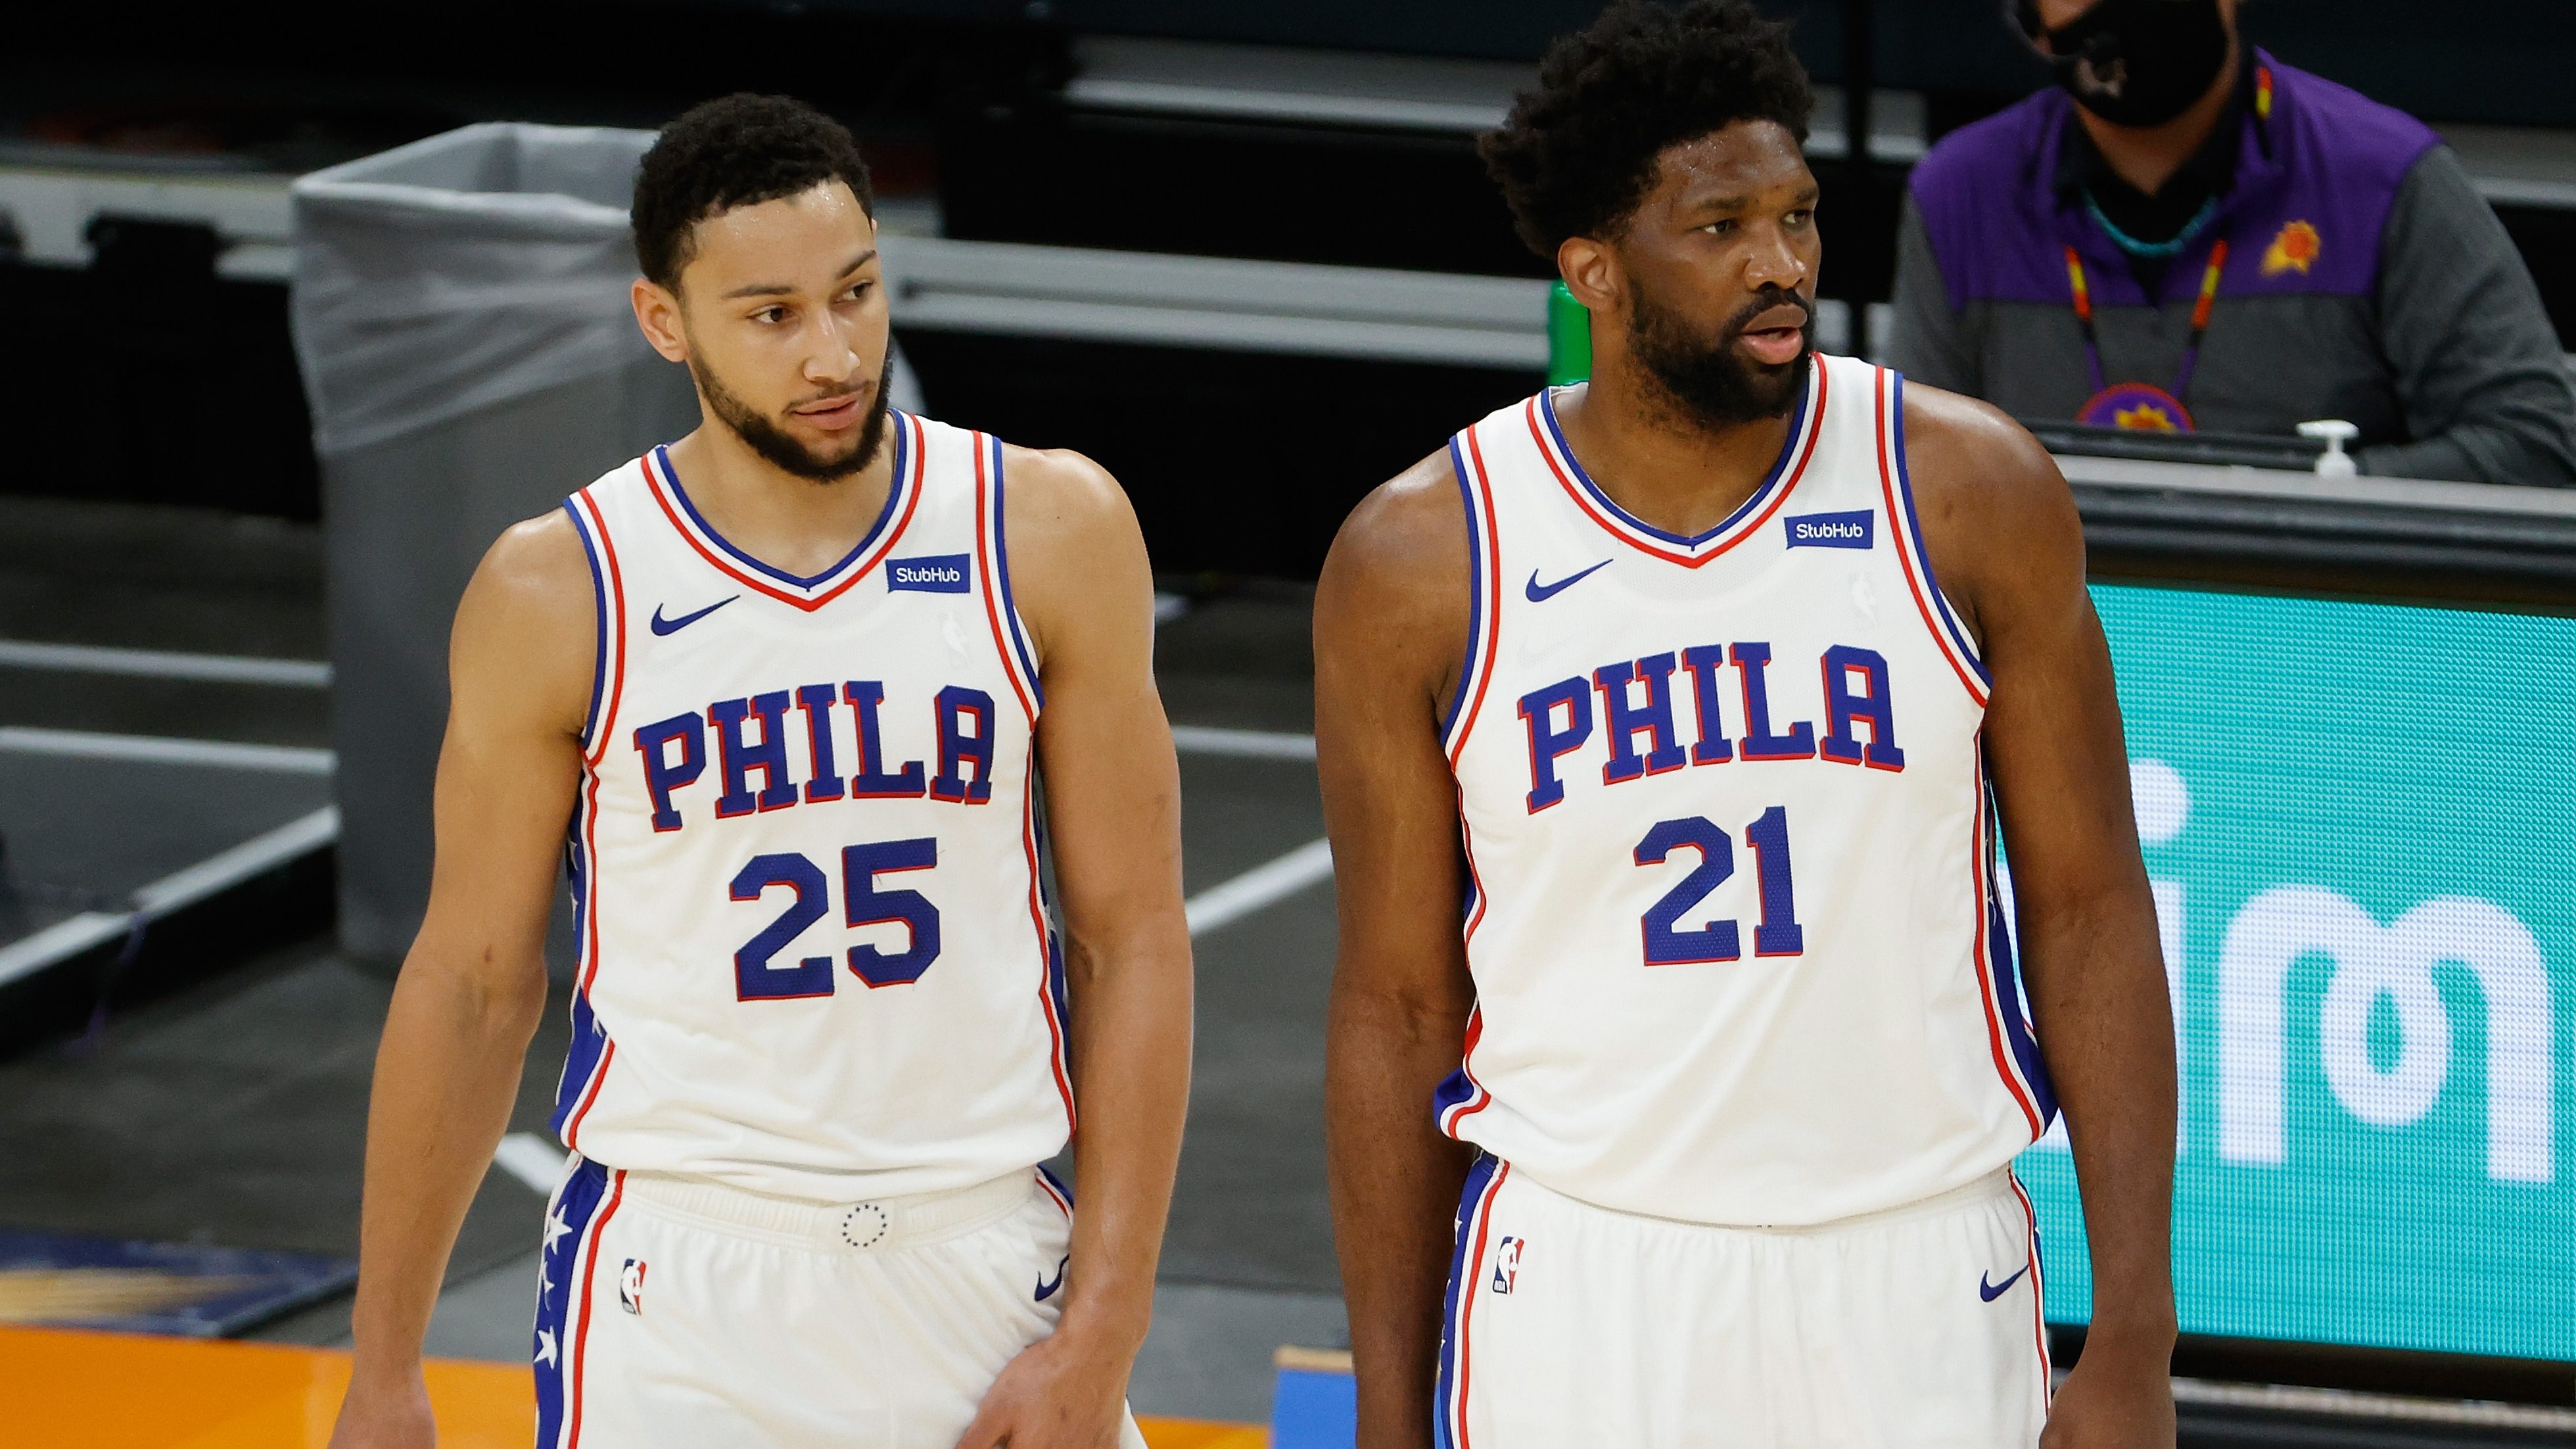 Embiid: Didn't Know Picture He Tweeted After Simmons Trade